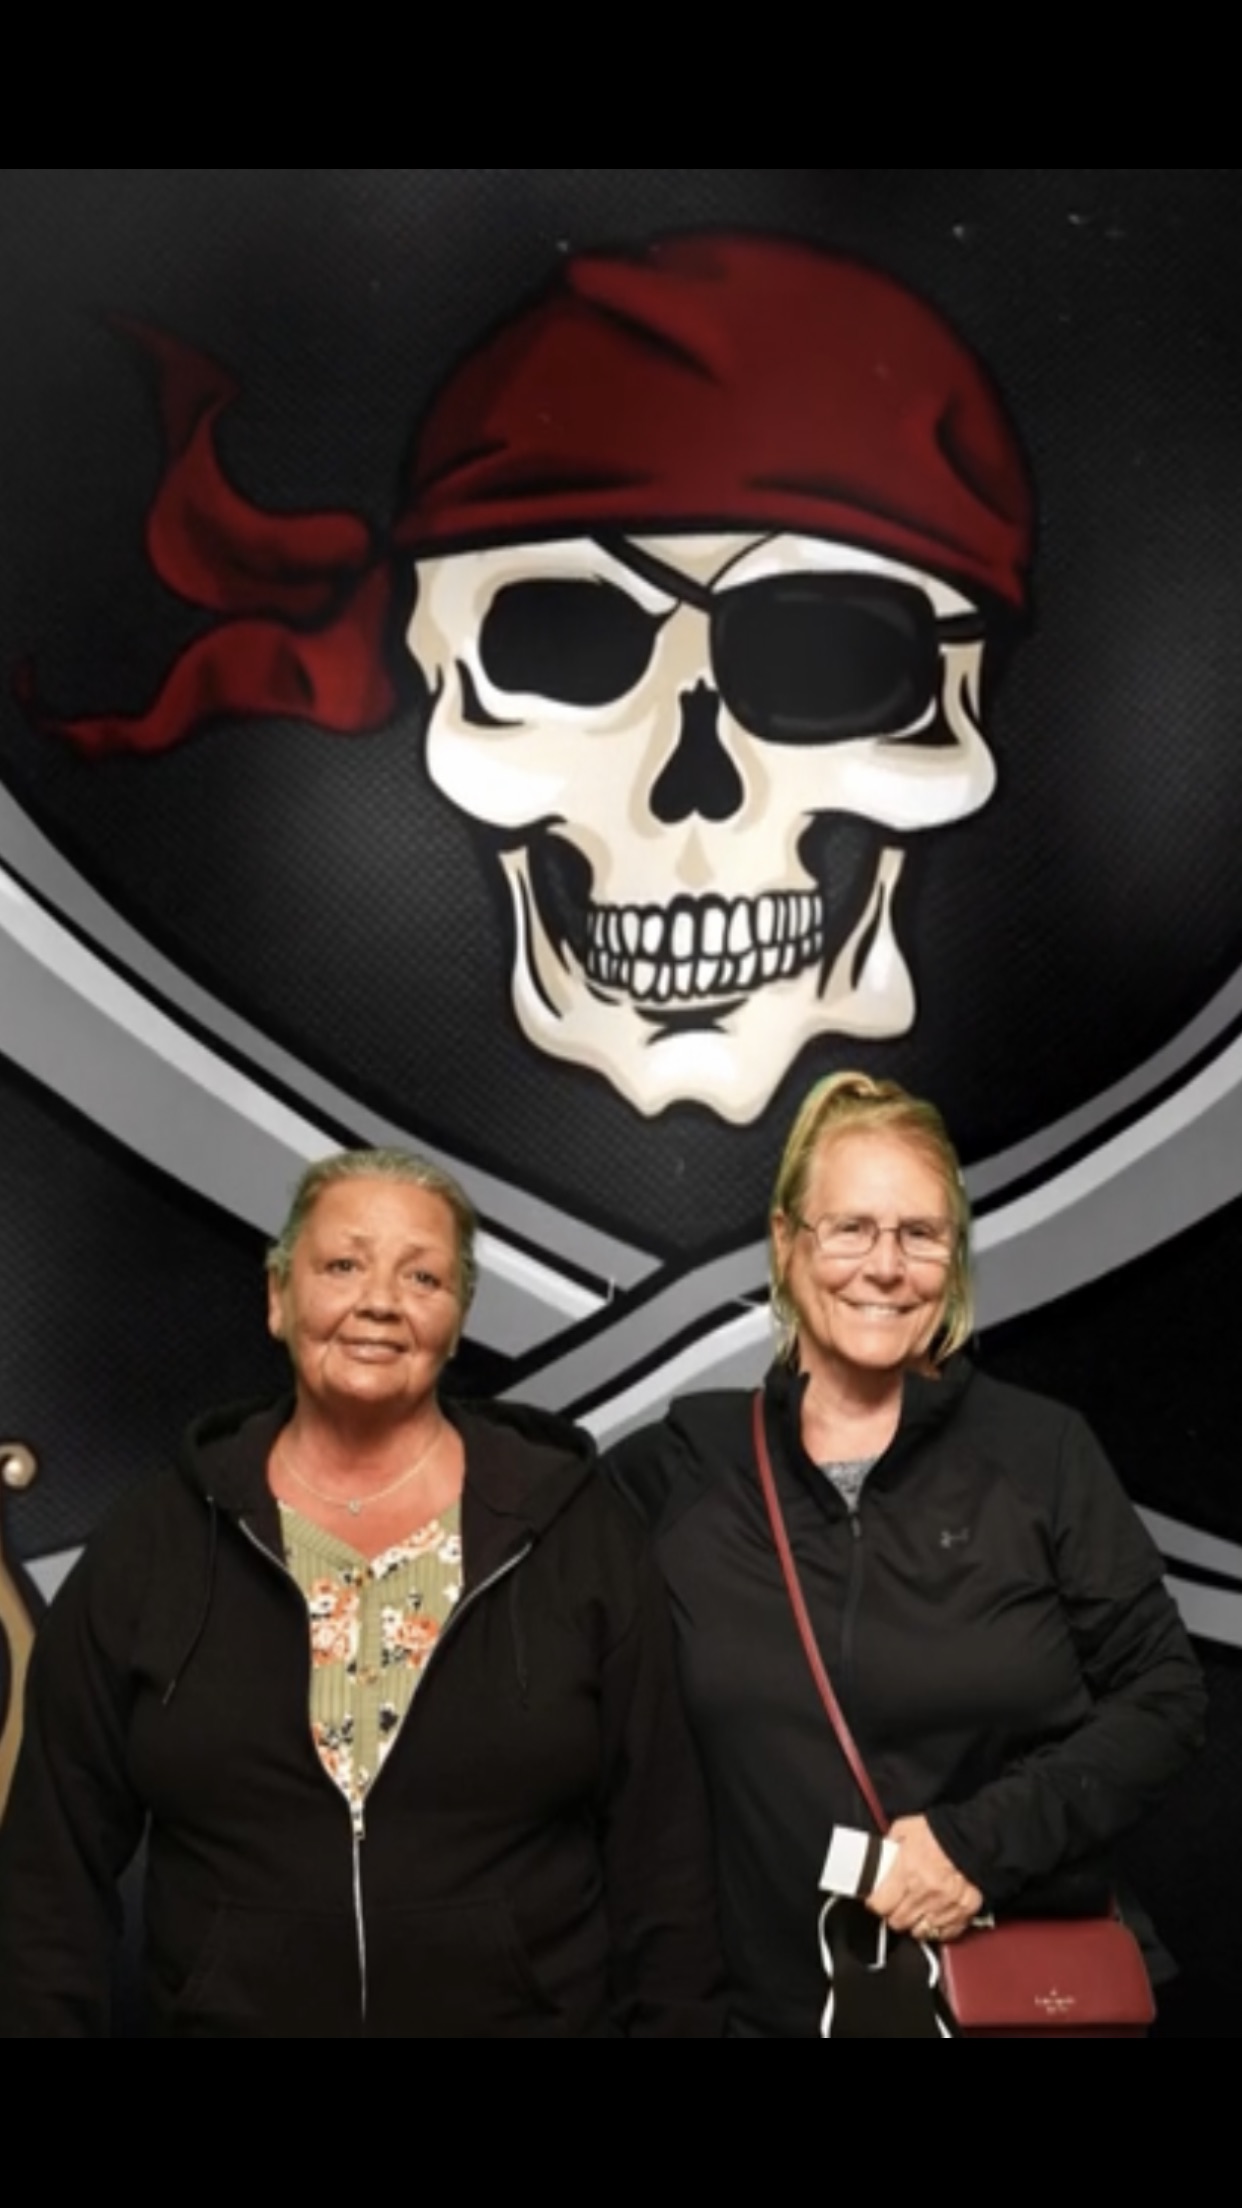 Pirates Voyage @ Myrtle Beach! For kids and/or adu...